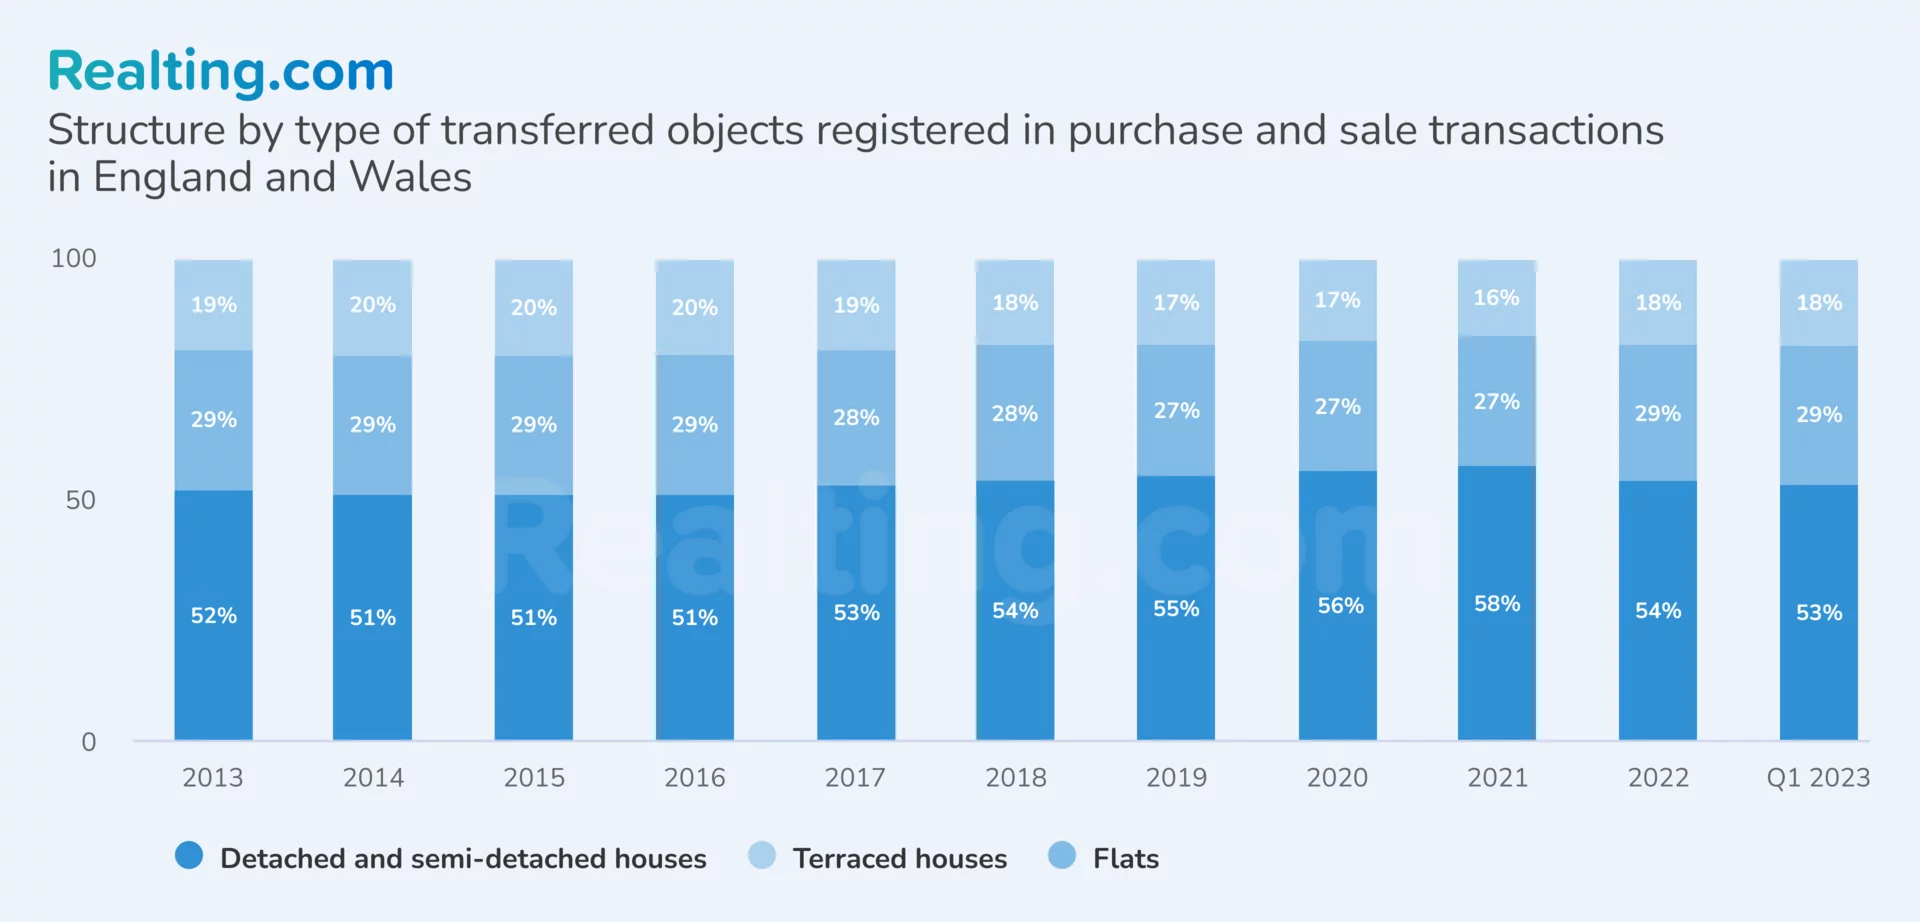 Structure by type of transferred properties registered in purchase and sale transactions in England and Wales